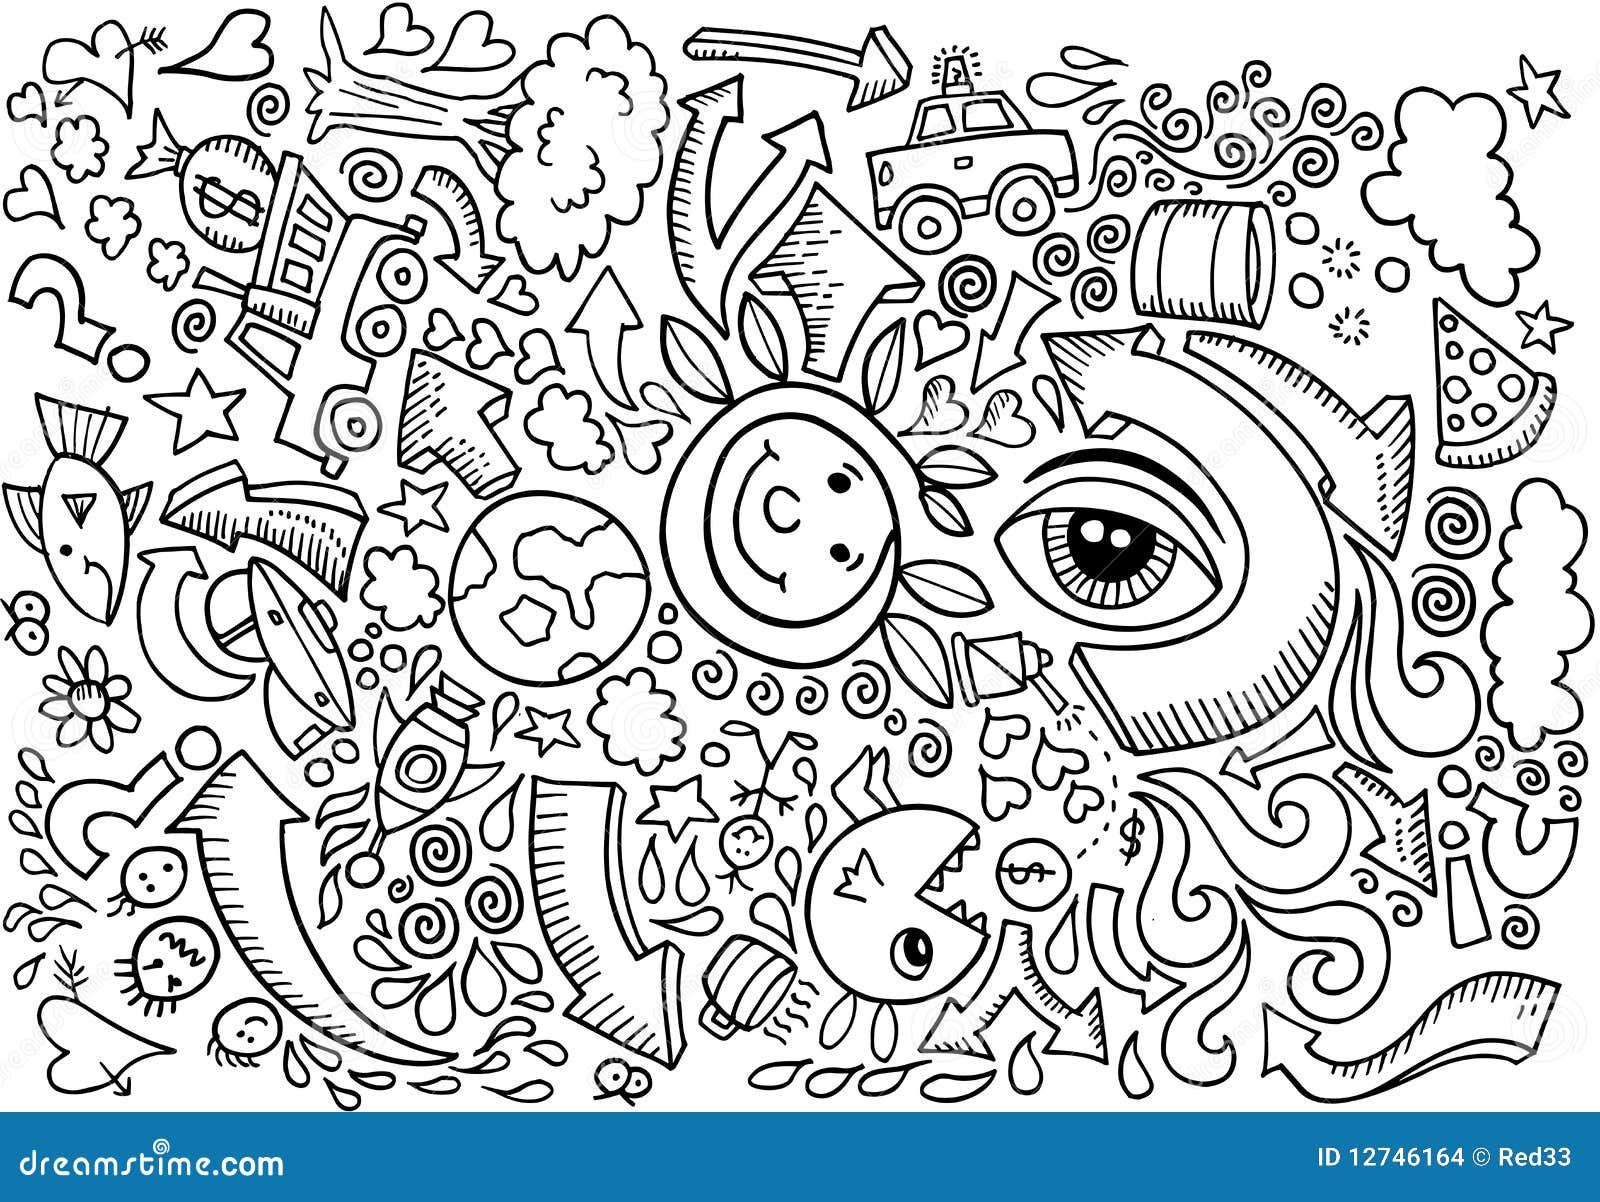 Doodle Sketch Drawing Vector Stock Images Image 12746164